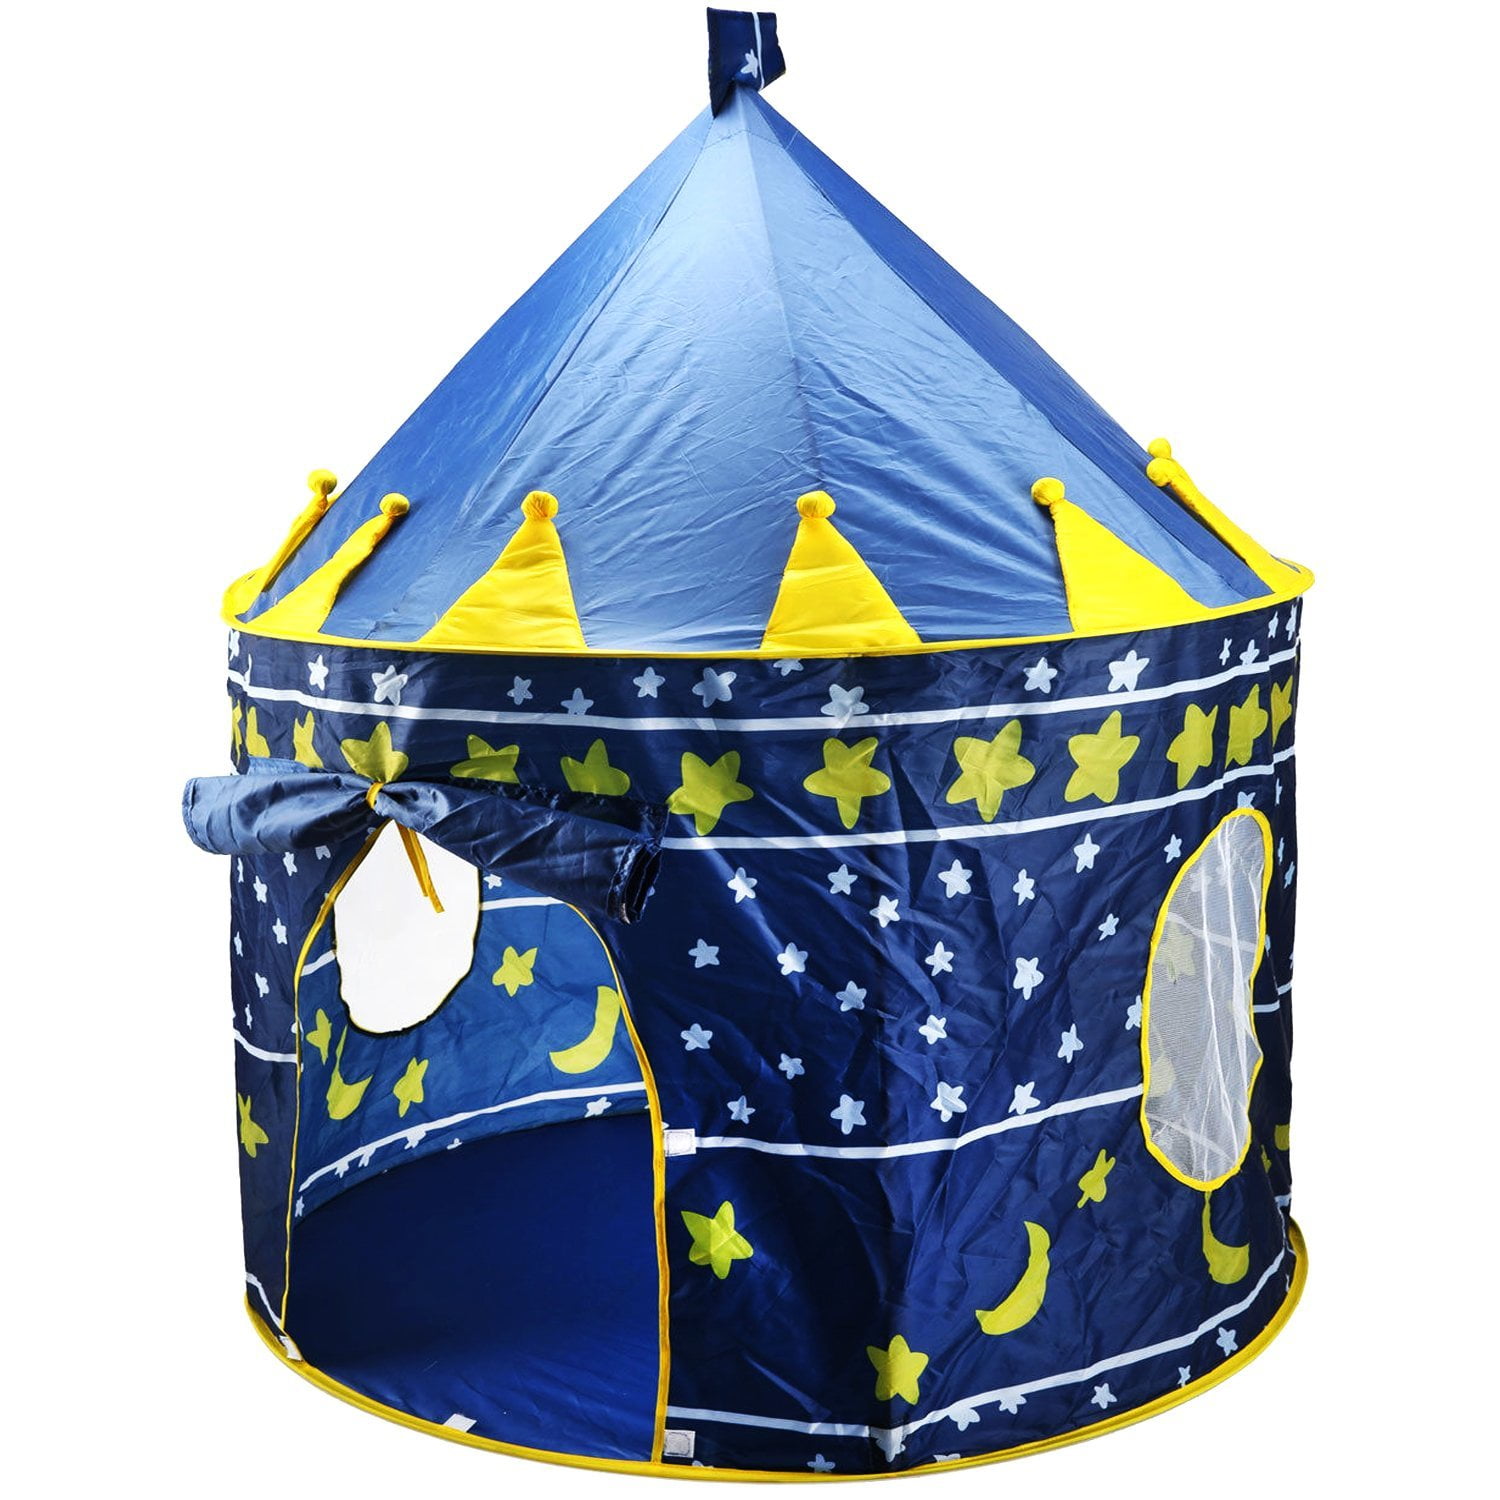 Details about   Kids Play Tent House Girls Boys Children Indoor Princess Prince Playhouse Teepee 